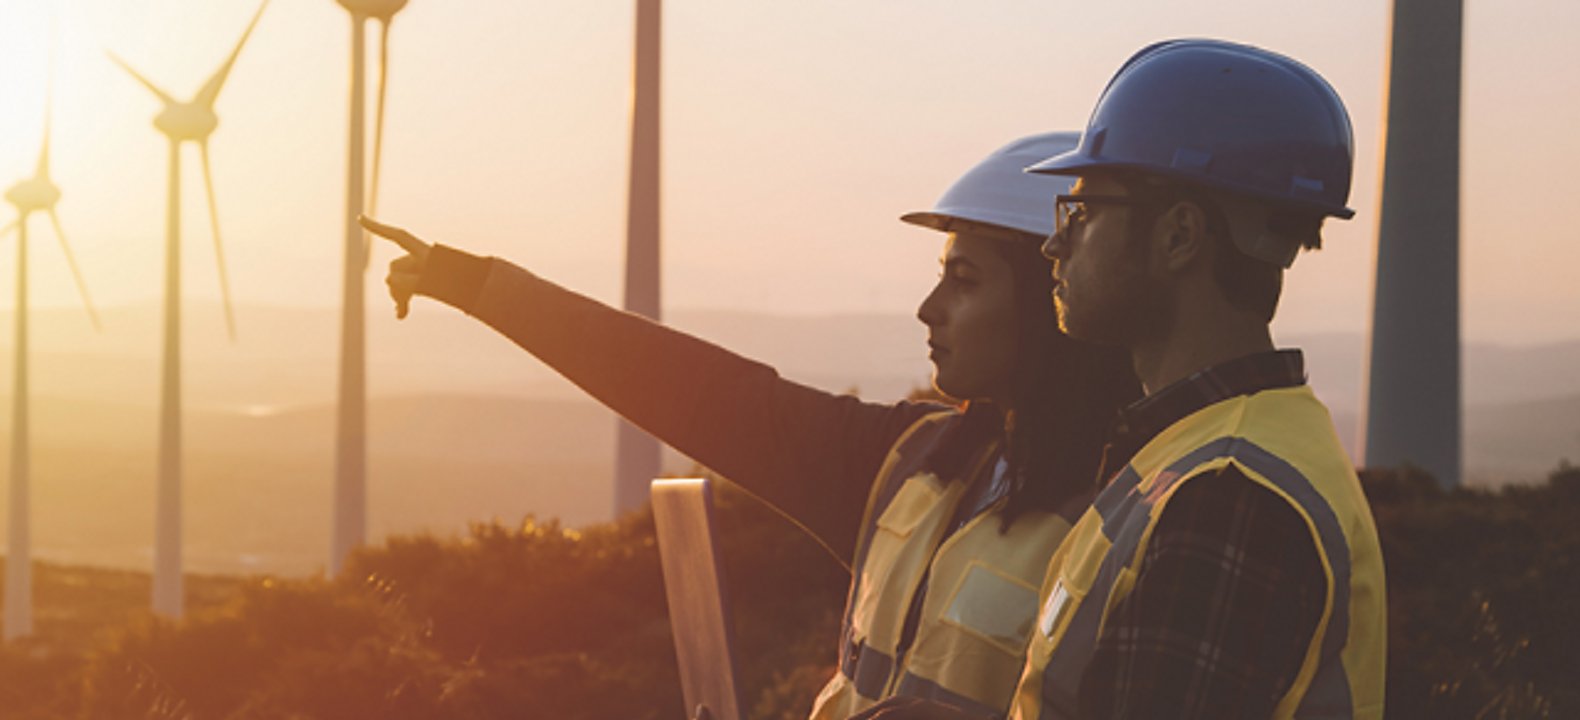 Two workers looking out over wind turbine field